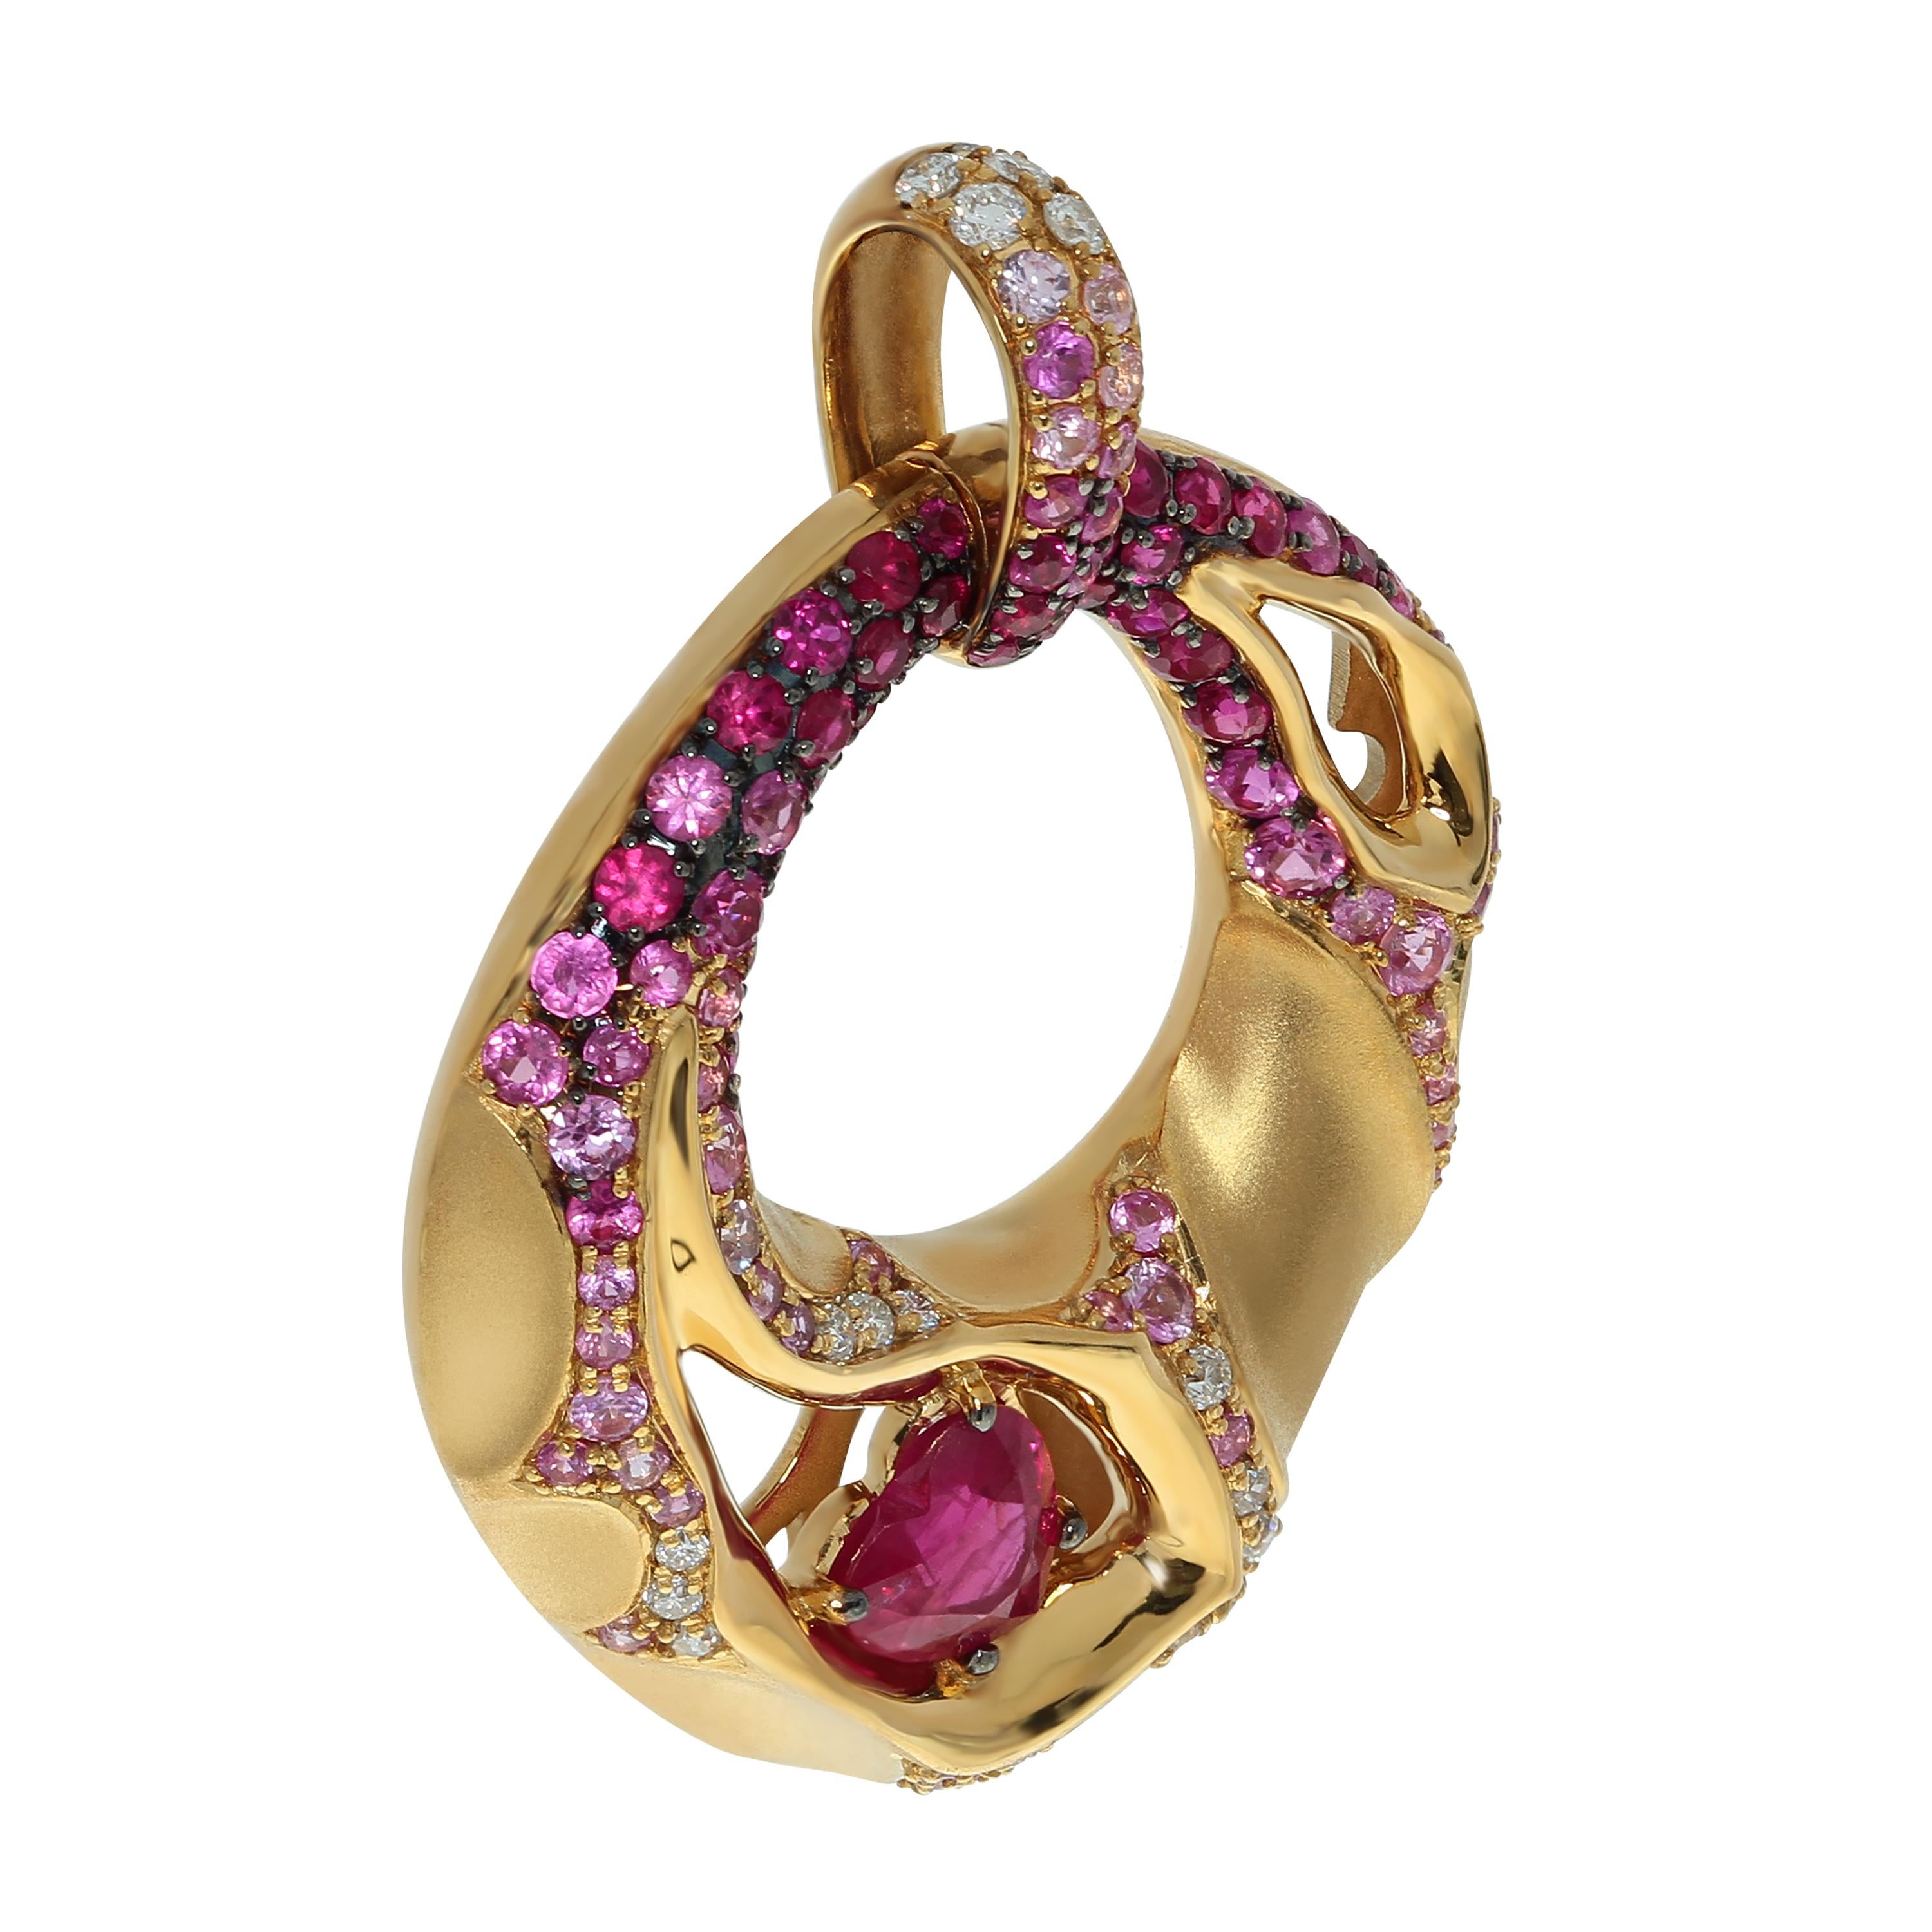 Ruby Diamond Pink Sapphire 18 Karat Yellow Gold HeartBeat Pendant
Pendant from the HeartBeat Collection. Сomposition resembles an exploded volcano, from the mouth of which lava flows from all sides. Center of the Yellow 18K Gold 